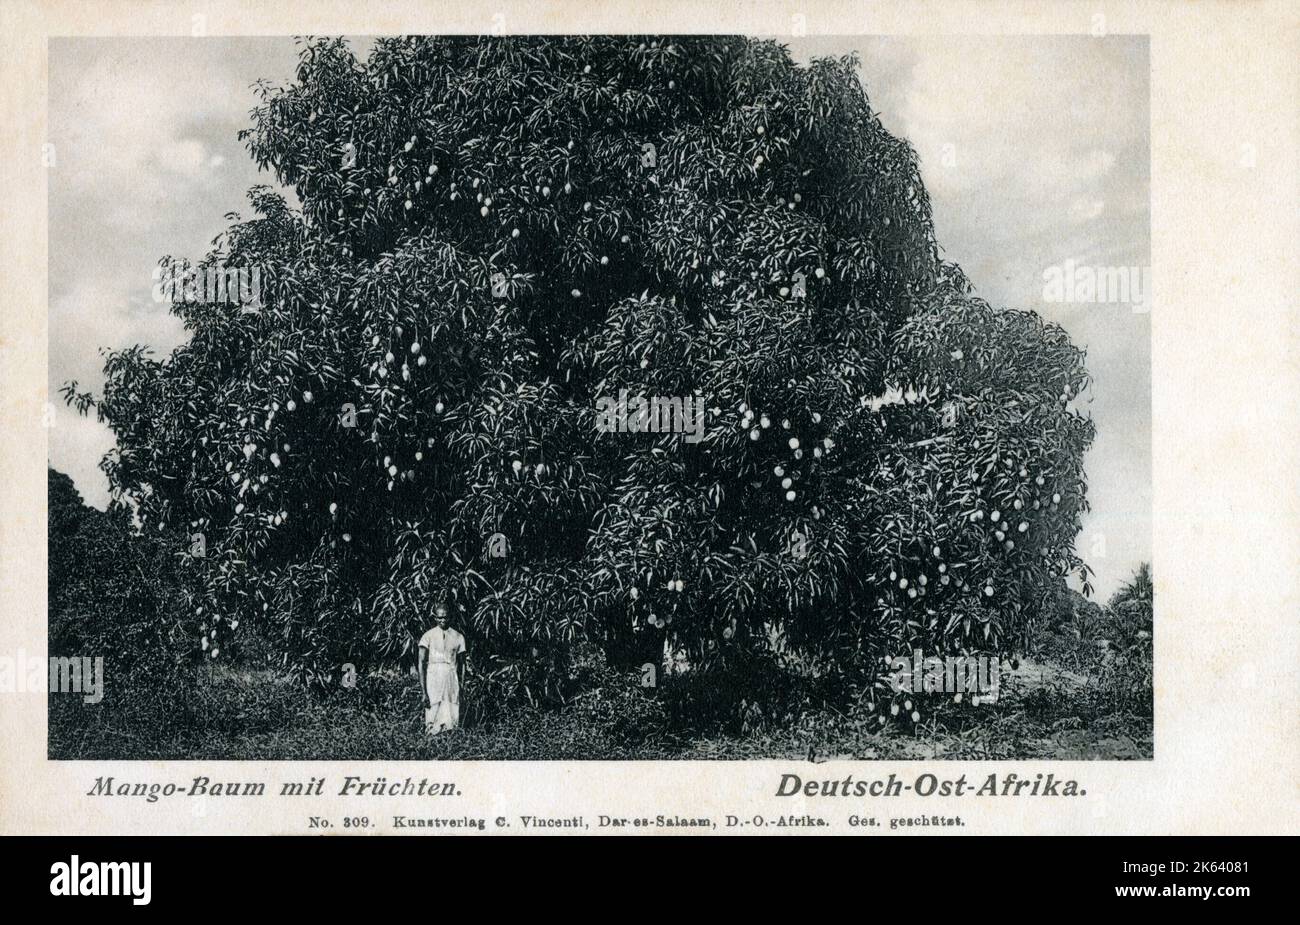 German East Africa - a Mango Tree full of fruit. German East Africa was a German colony in the African Great Lakes region, which included present-day Burundi, Rwanda, the Tanzania mainland, and the Kionga Triangle, a small region later incorporated into Mozambique. Stock Photo